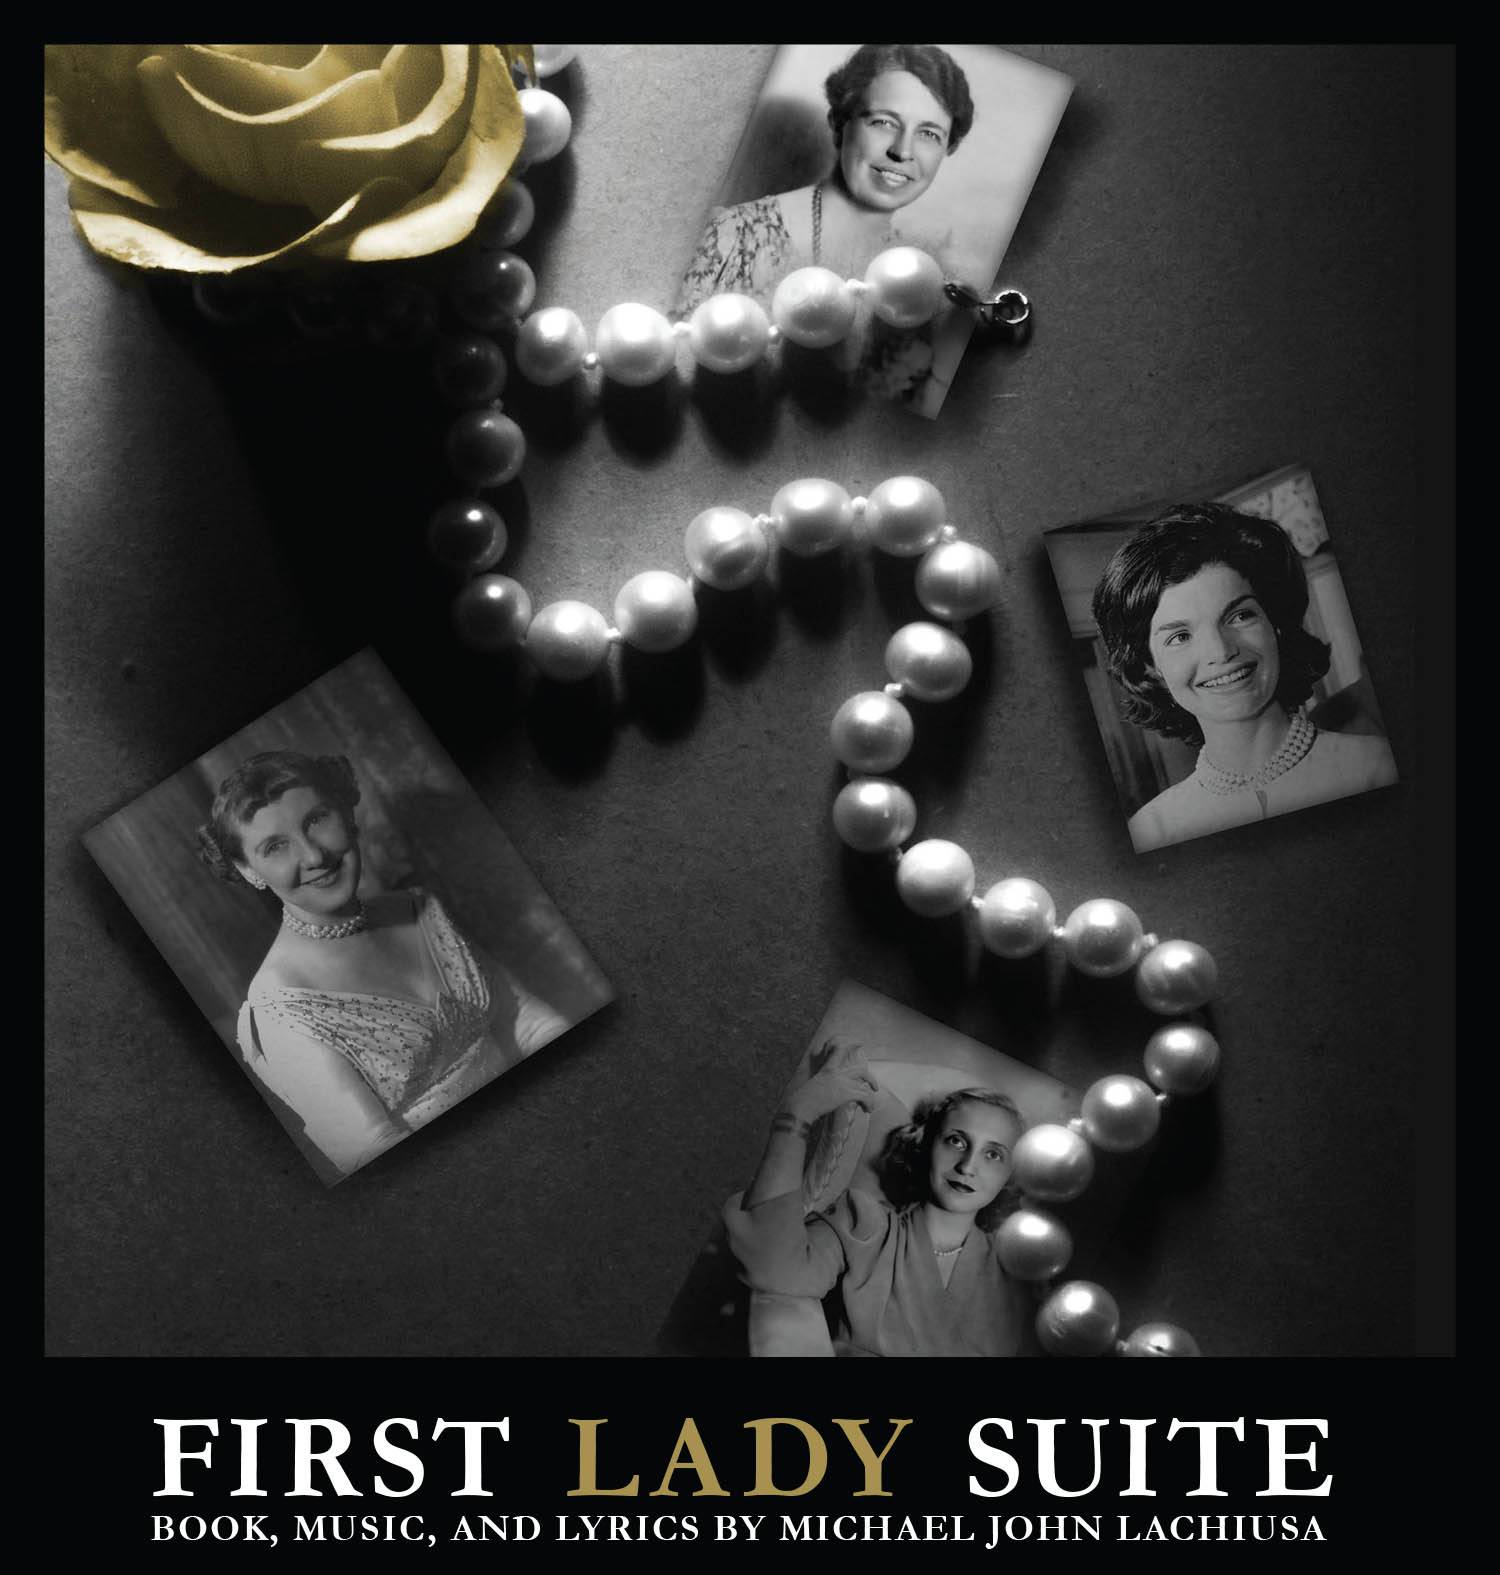 Spend an evening with the First Ladies